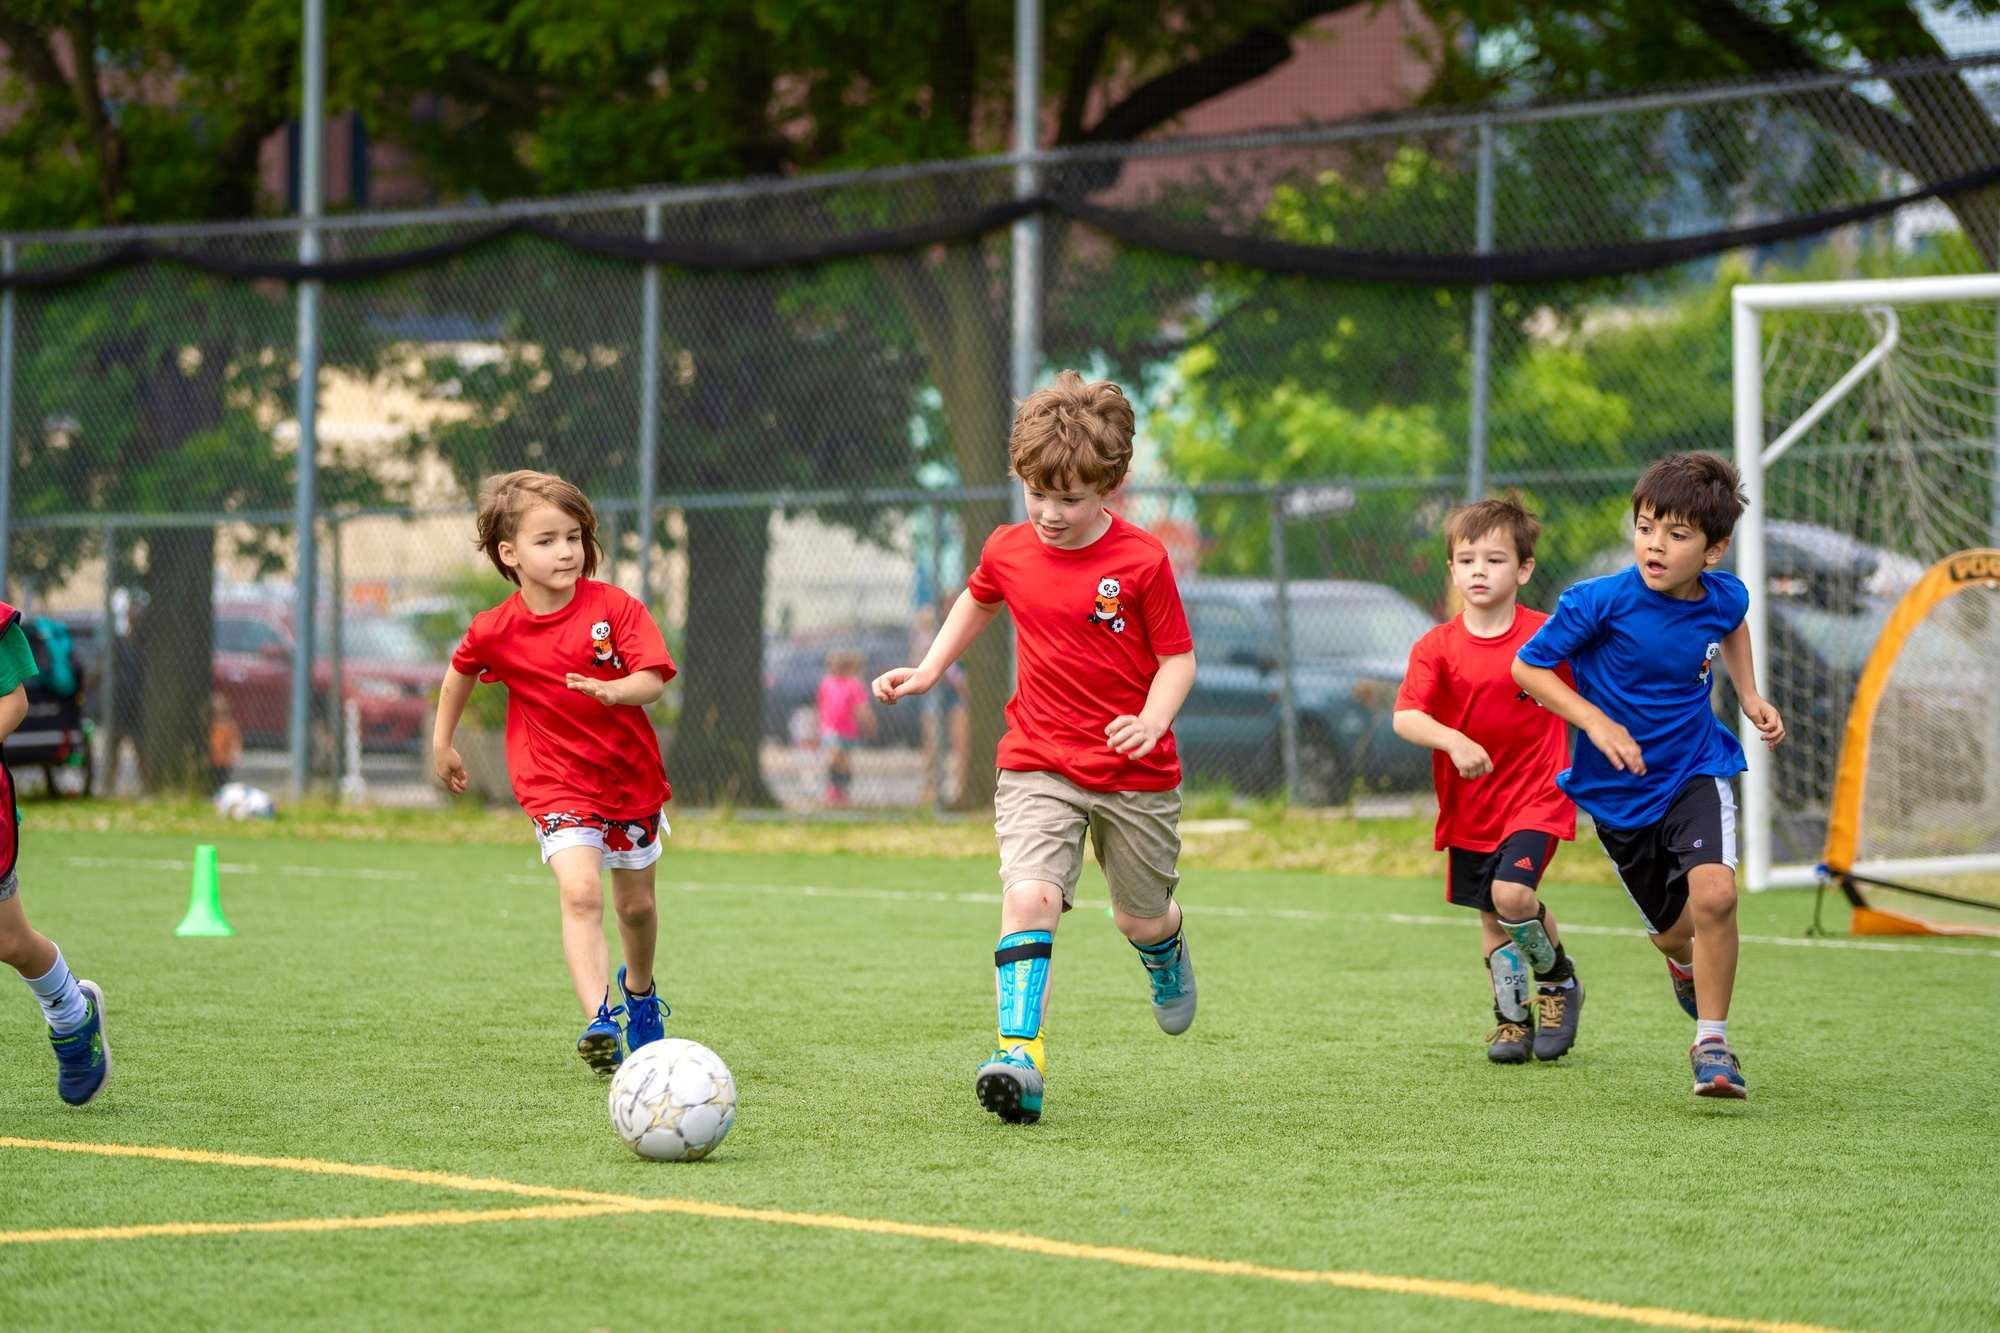 Dc-way-soccer-club-for-kids-in-washington-dc-capitol-hill-league-at-brentwood-hamilton-park-06-03-2023 0087.jpg